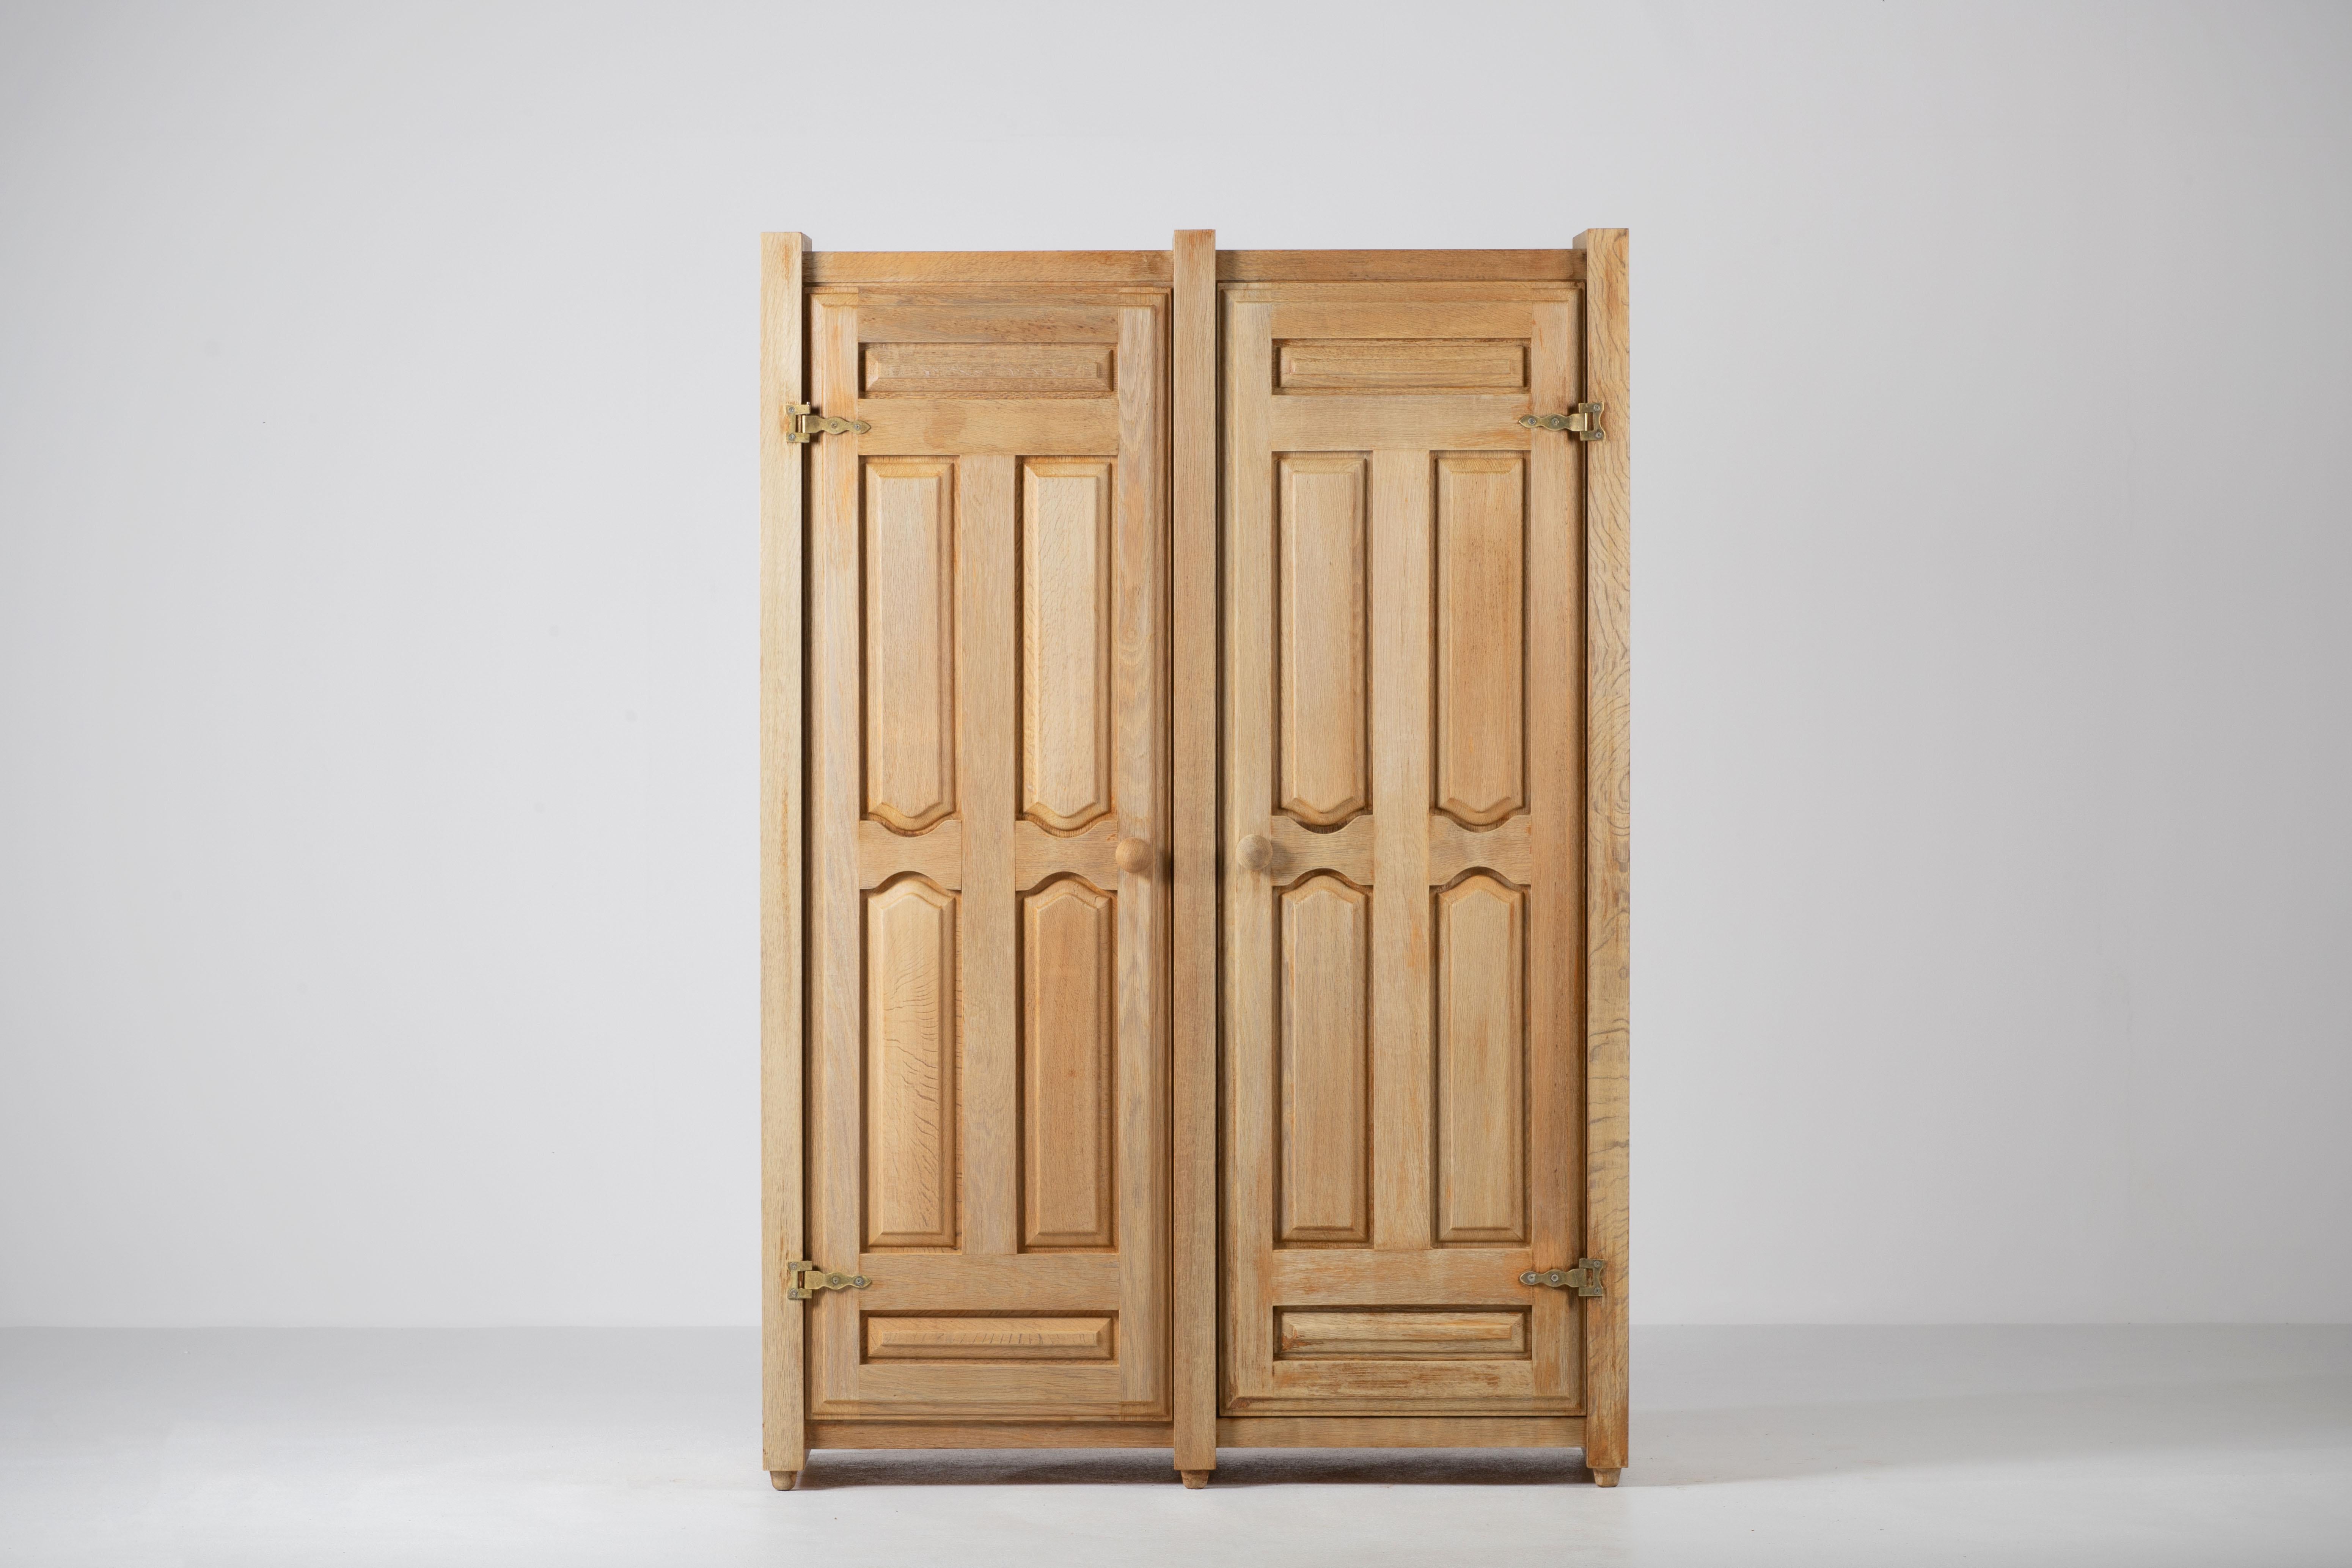 Elegant and rare wardrobe by French designers Guillerme and Chambron featuring two storages compartments, with rack and shelves.

The iconic wardrobe is in overall good vintage condition.

